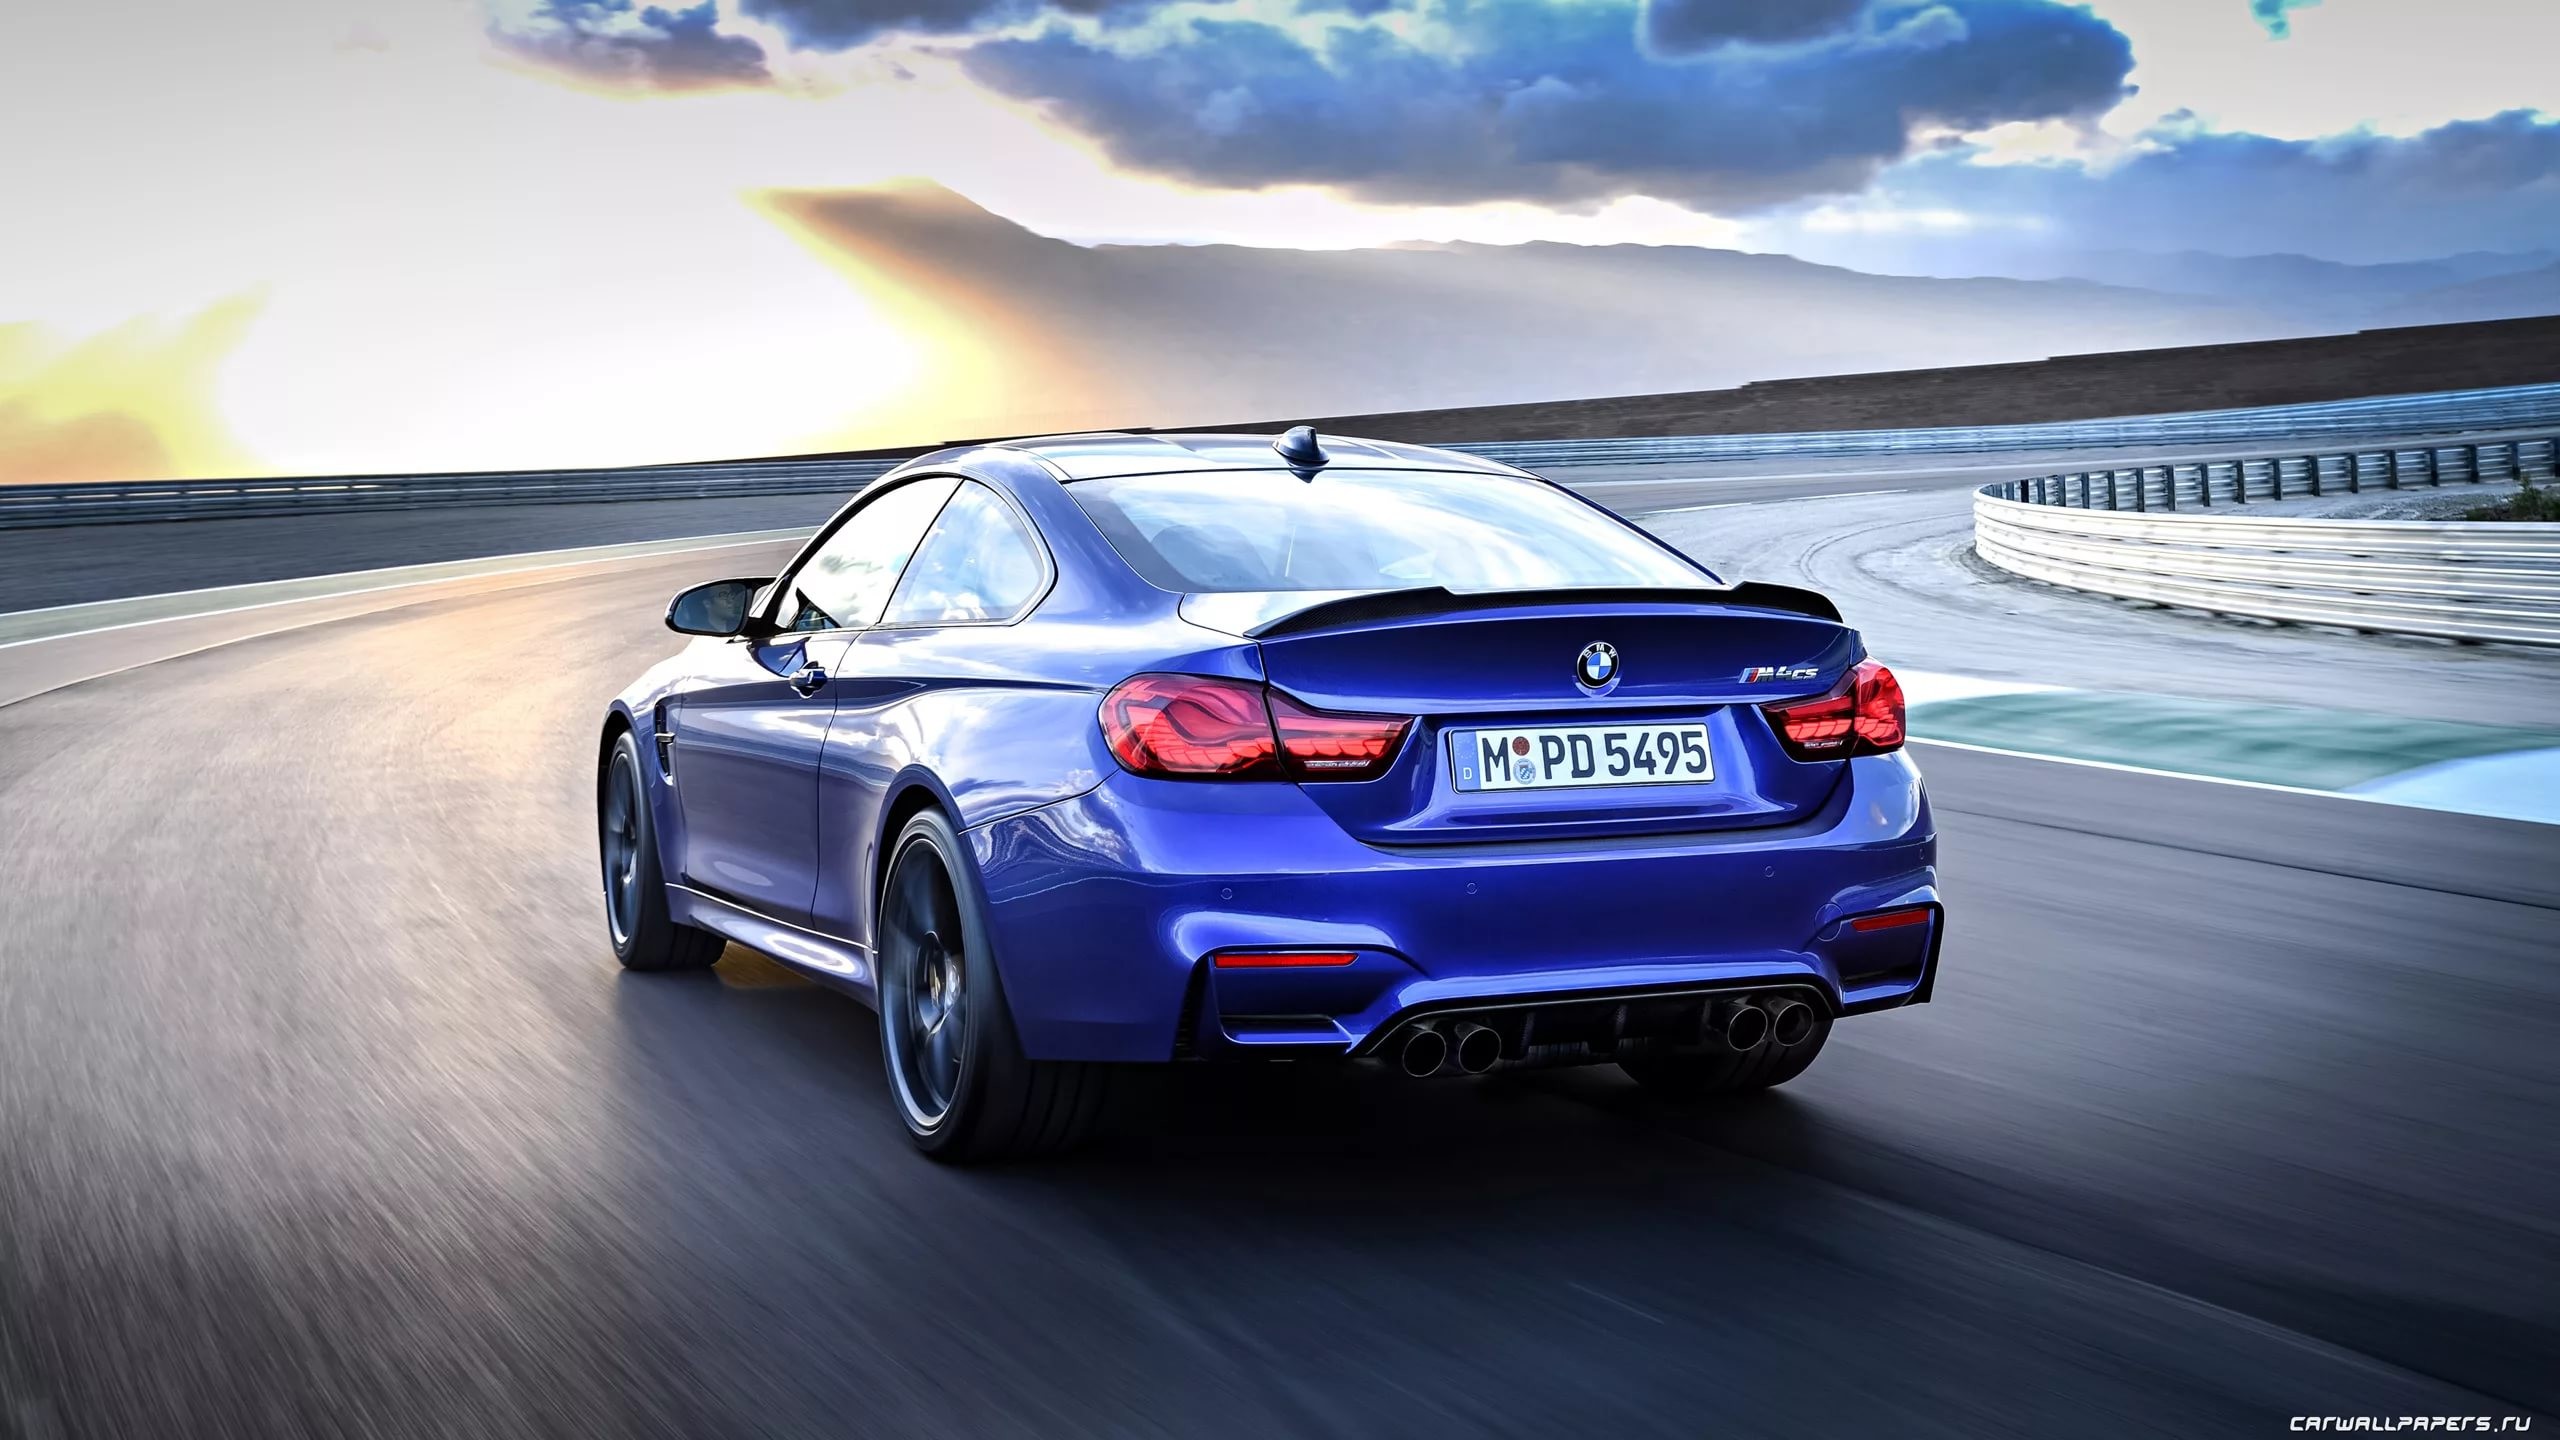 2560x1440 ... Bmw M4 Wallpaper for Computer ...